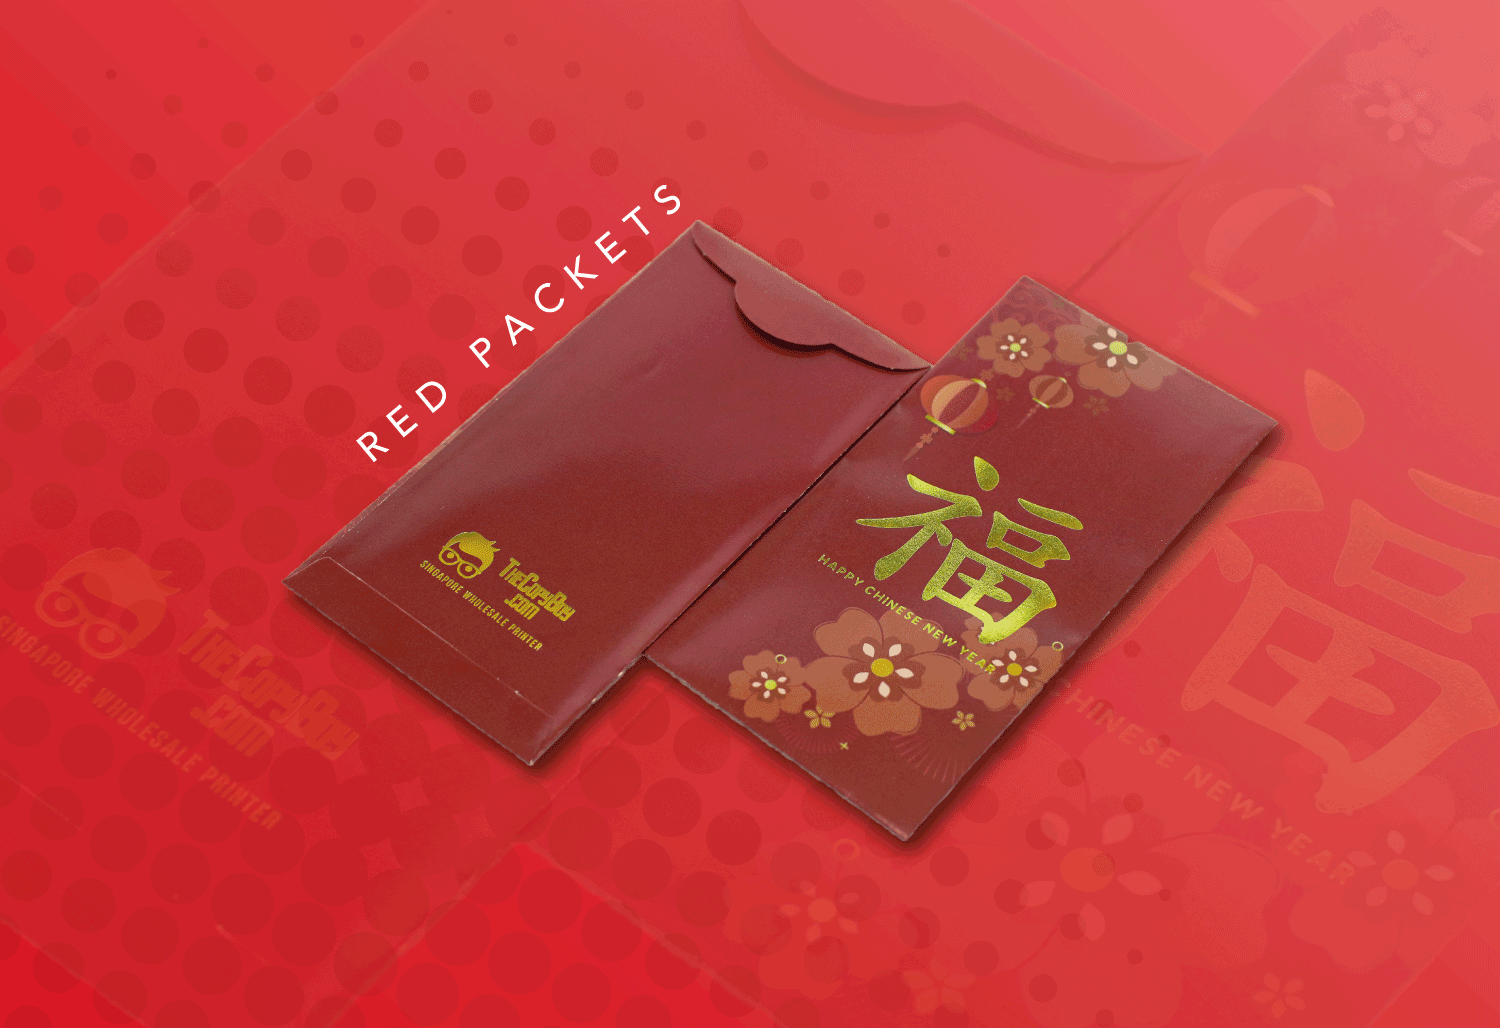 Chinese Red Envelope PNG Transparent Images Free Download, Vector Files